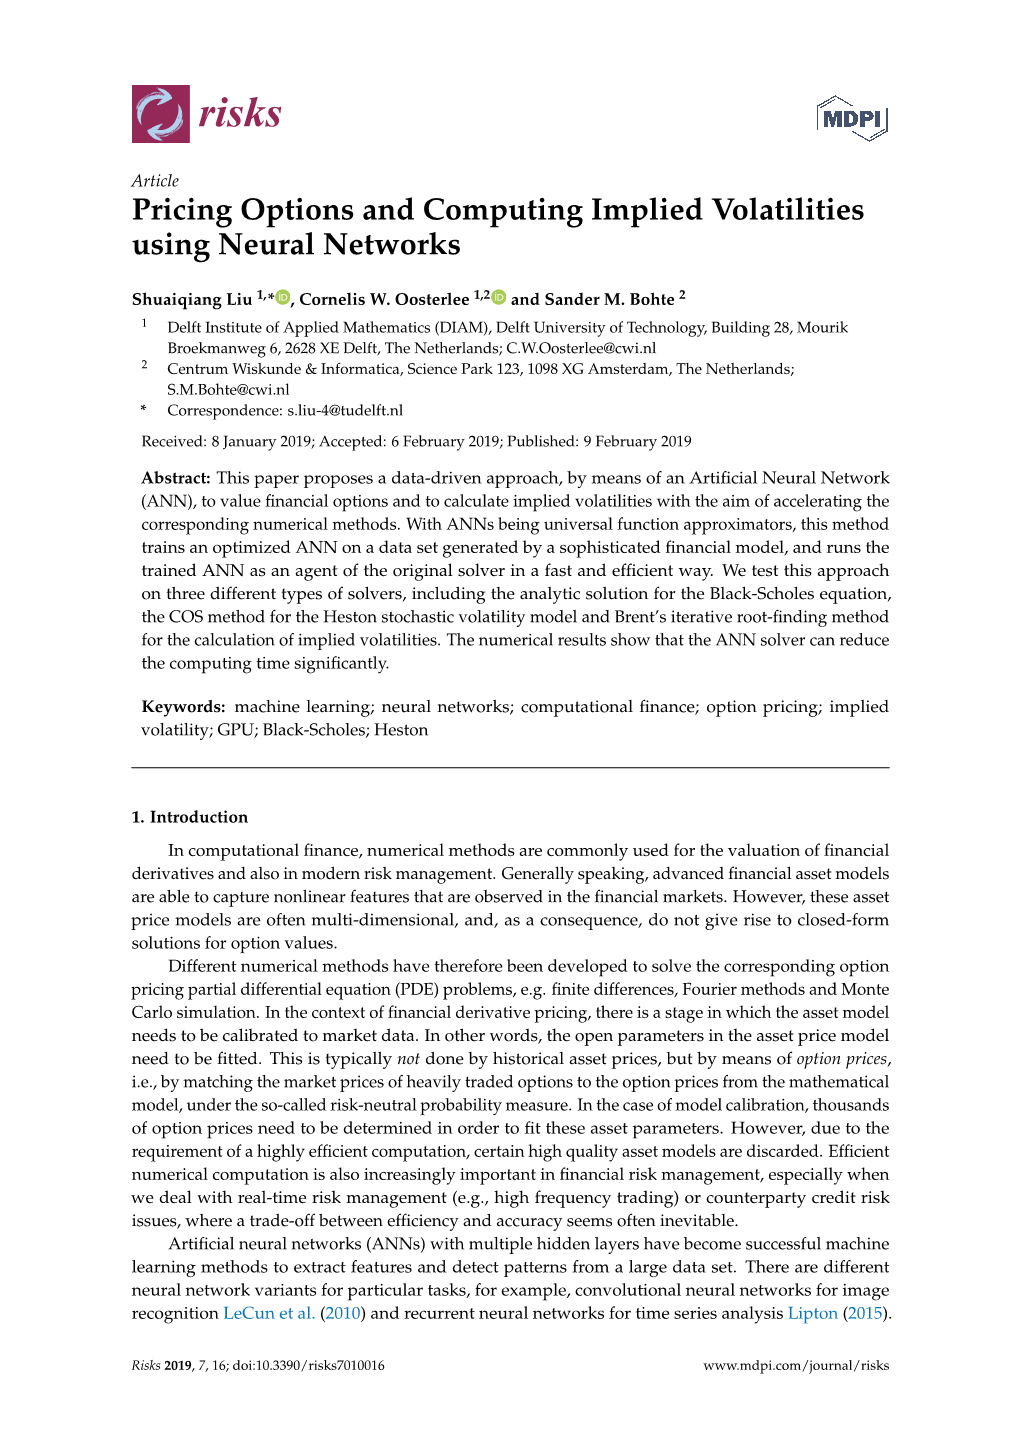 Pricing Options and Computing Implied Volatilities Using Neural Networks